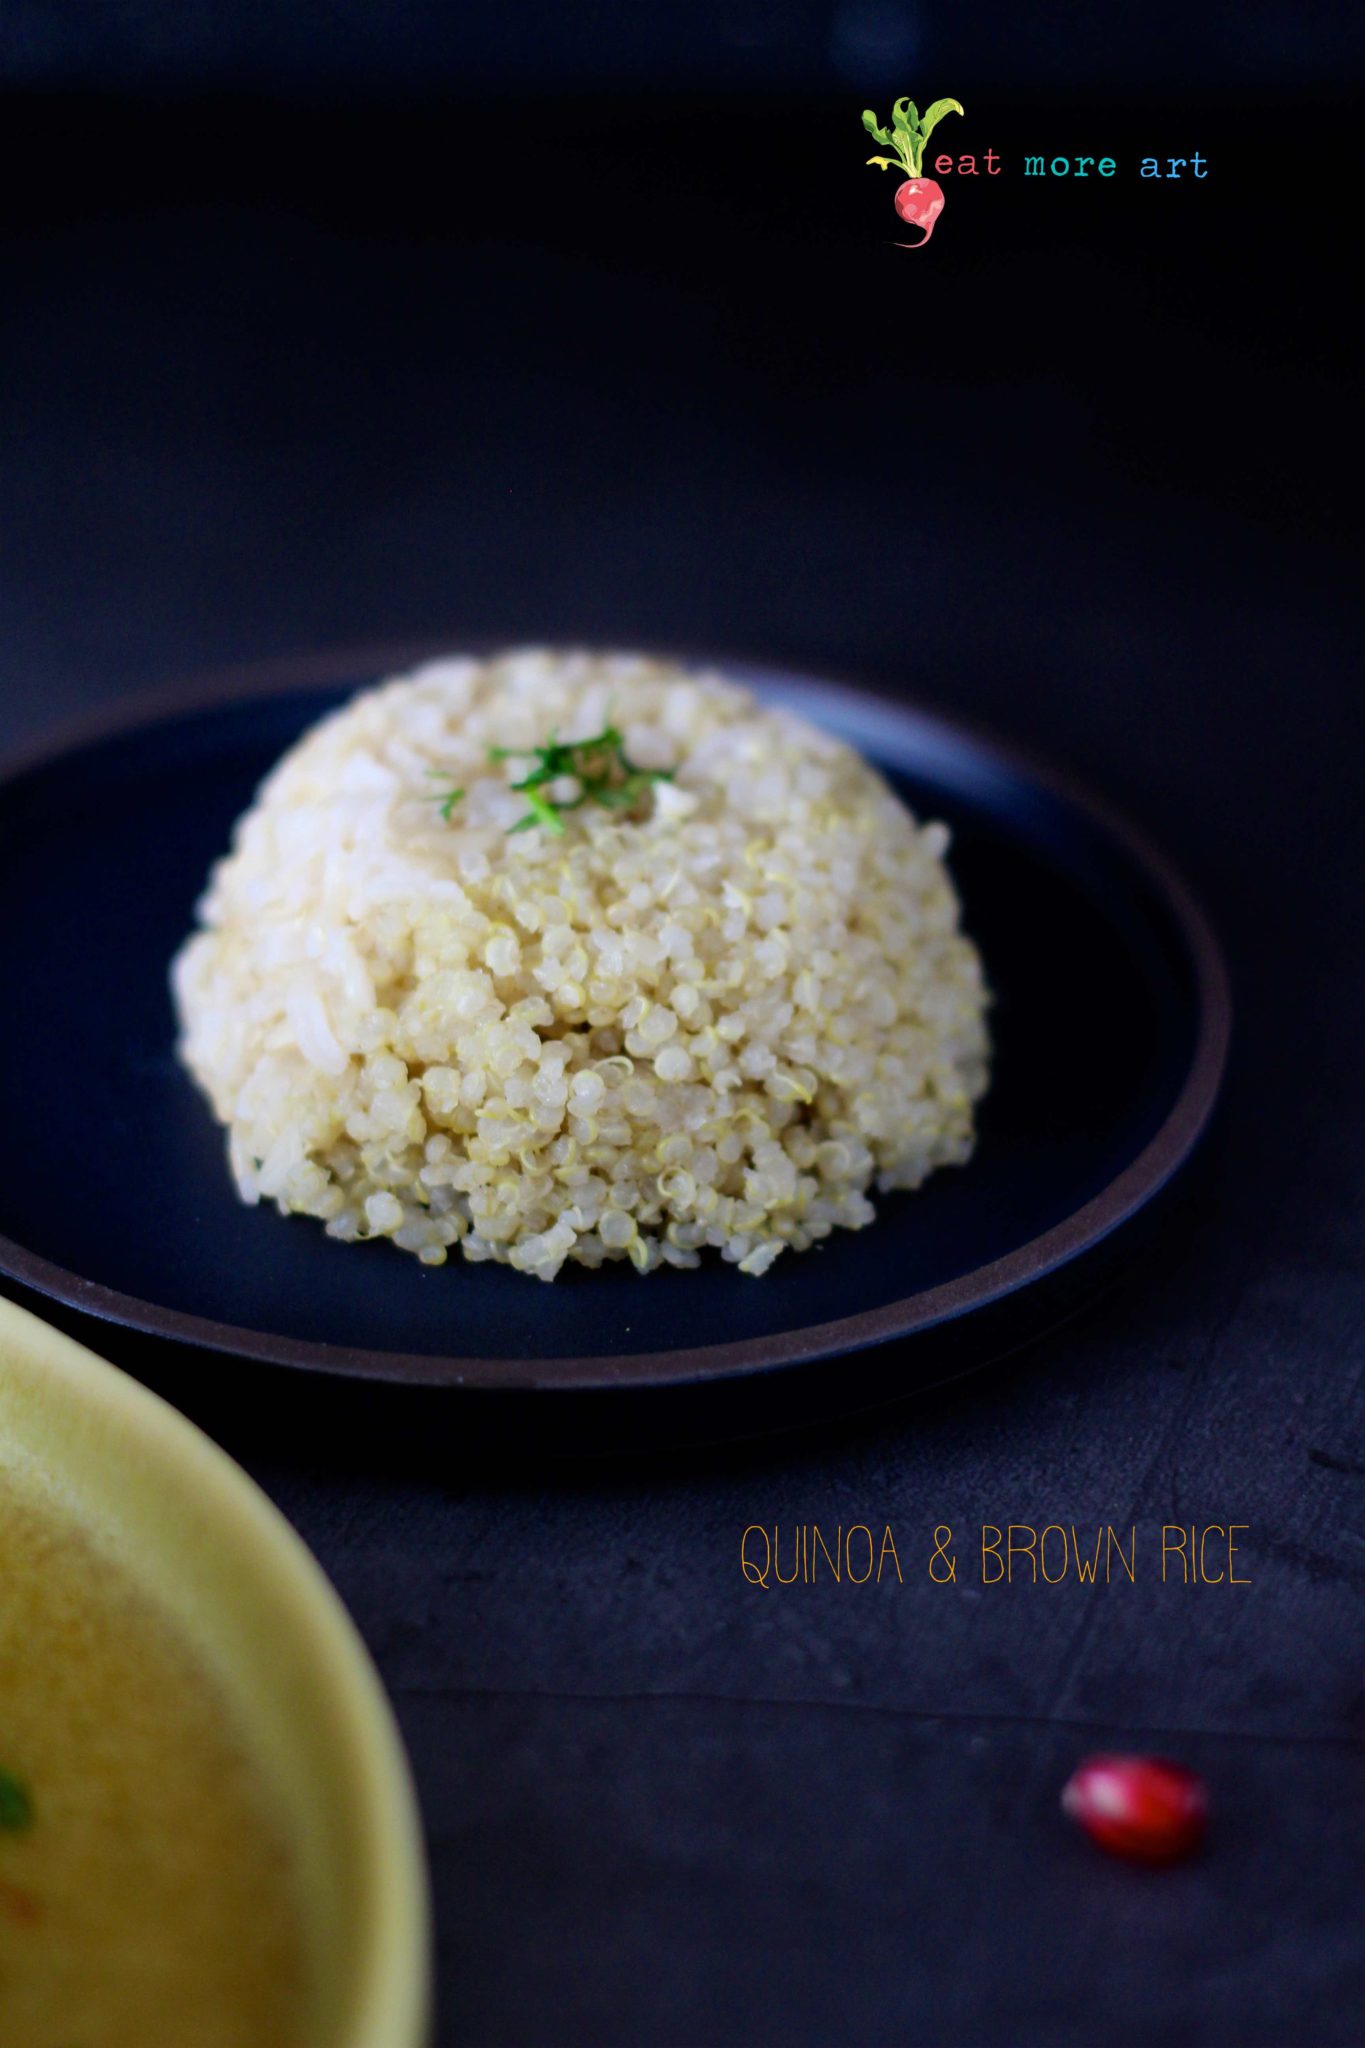 A side shot of quinoa and brown rice on black backdrop